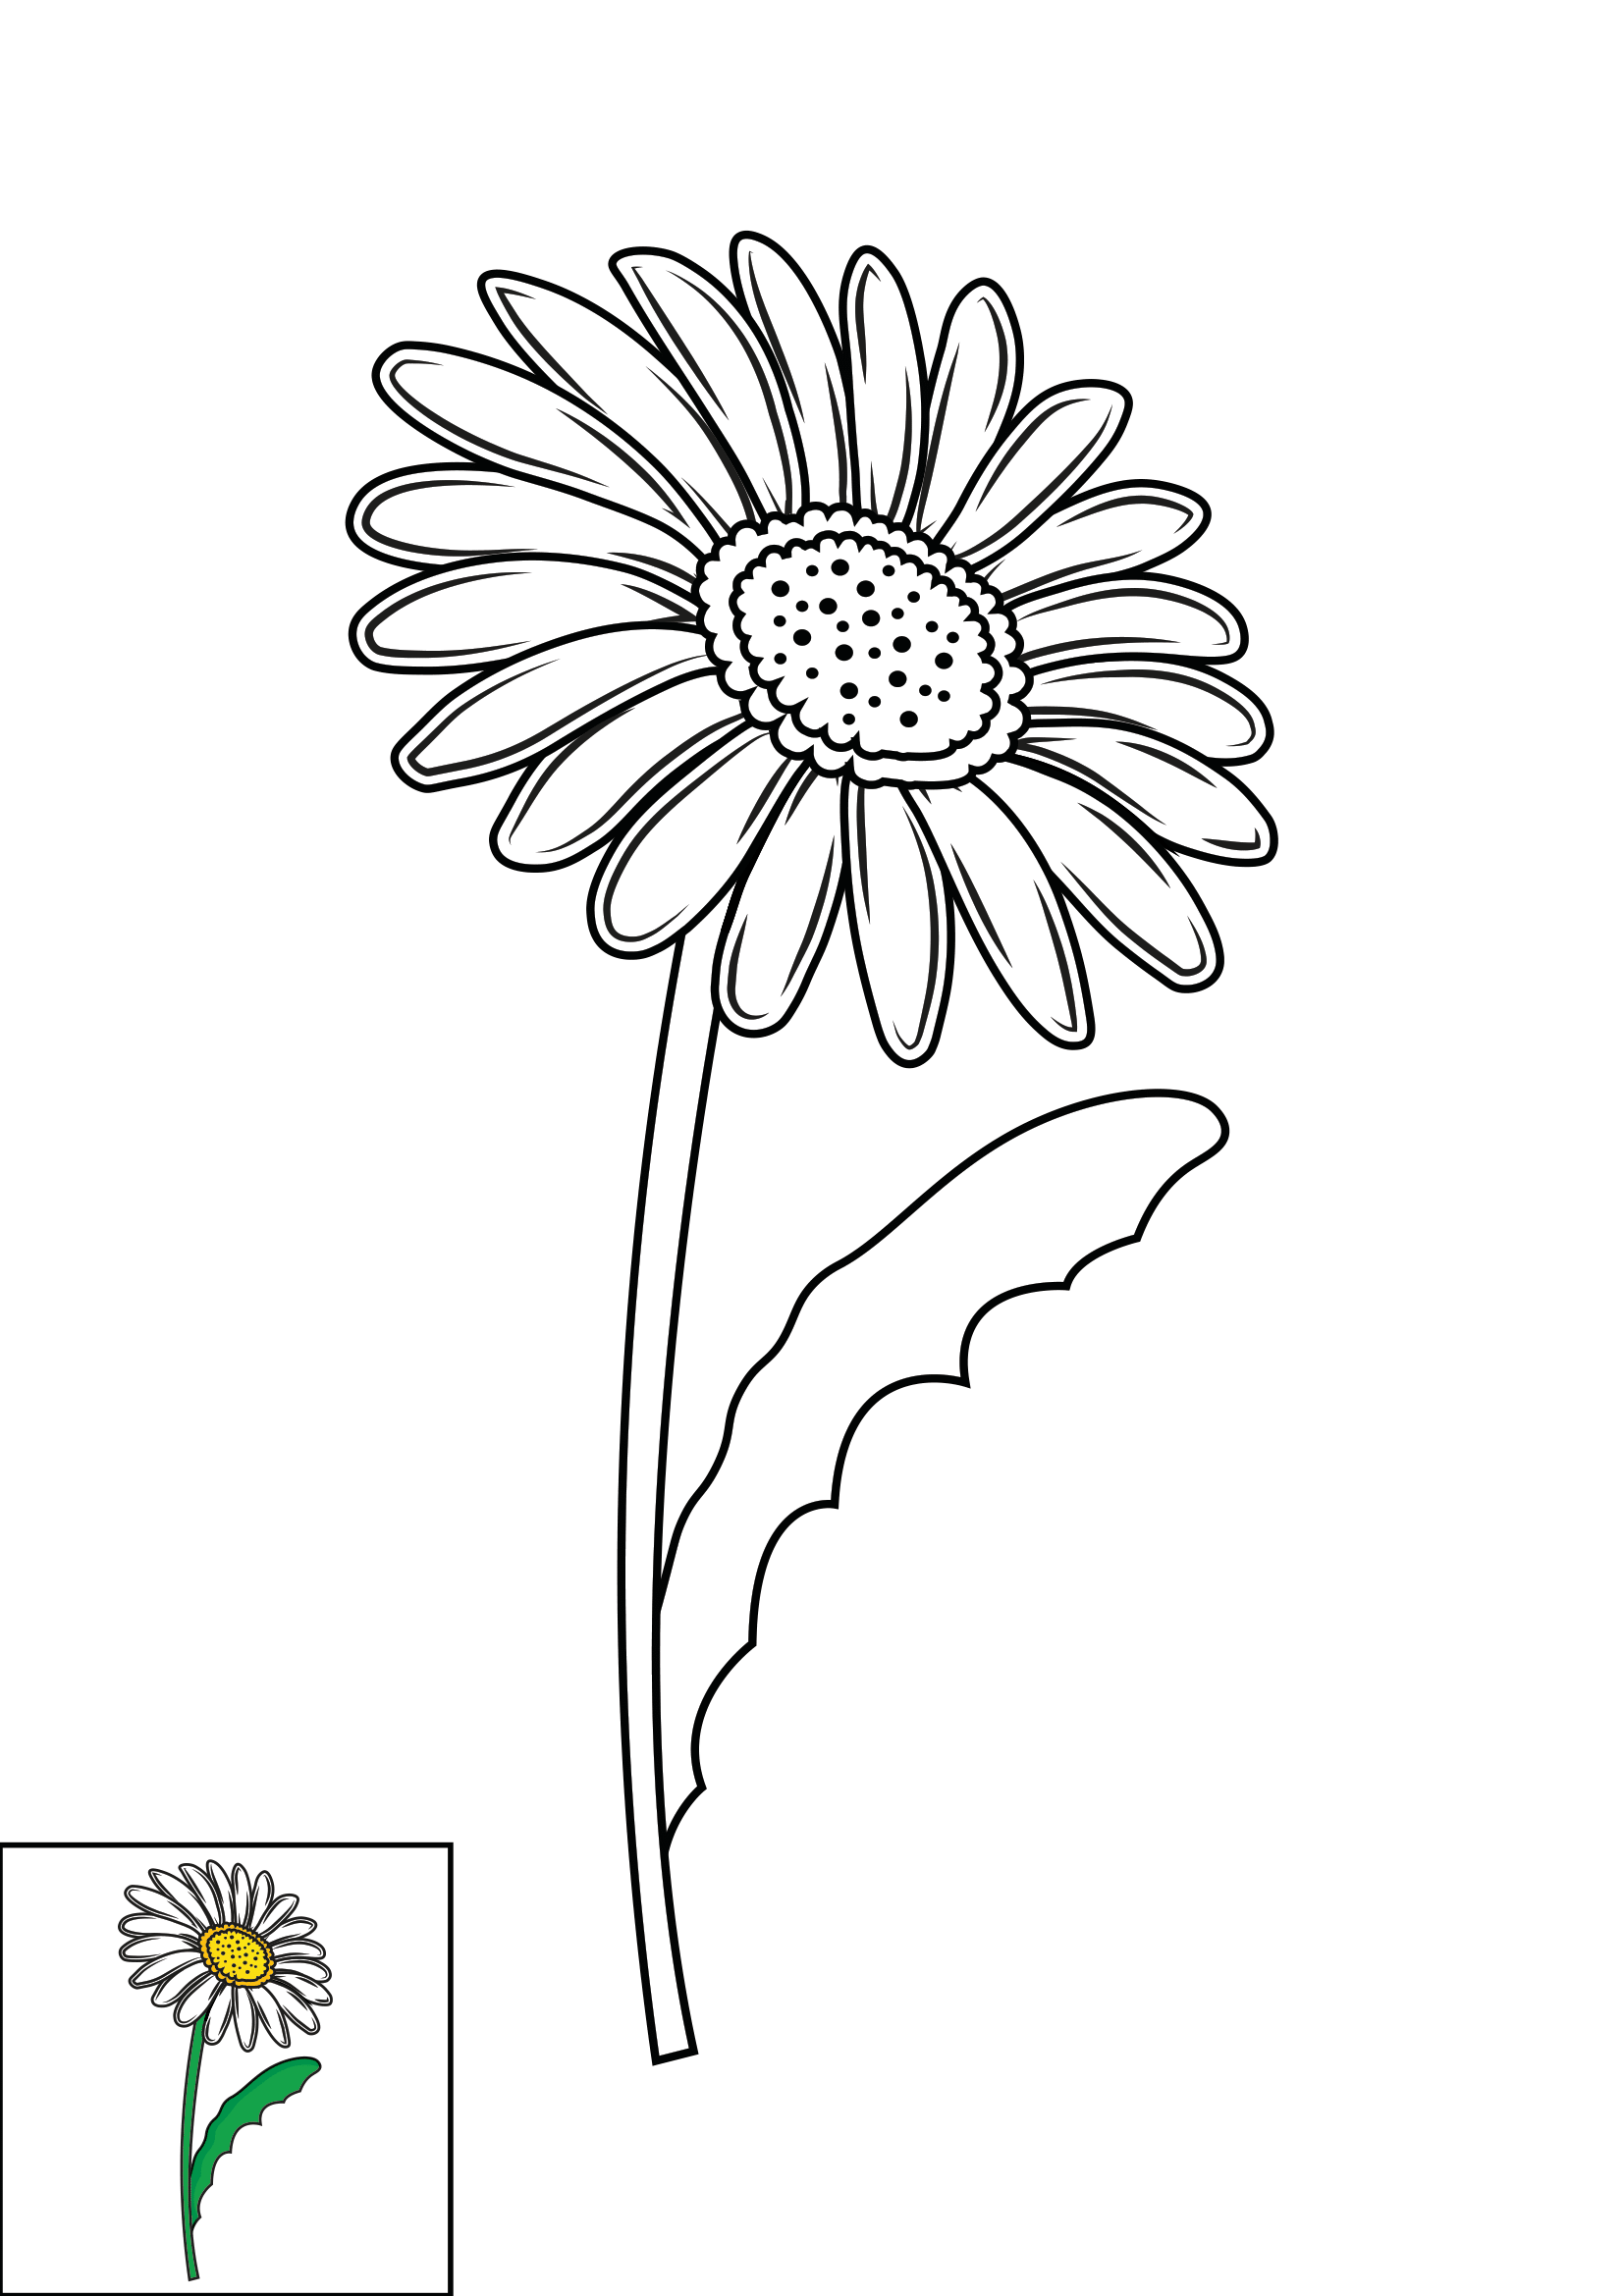 How to Draw A Daisy Step by Step Printable Color